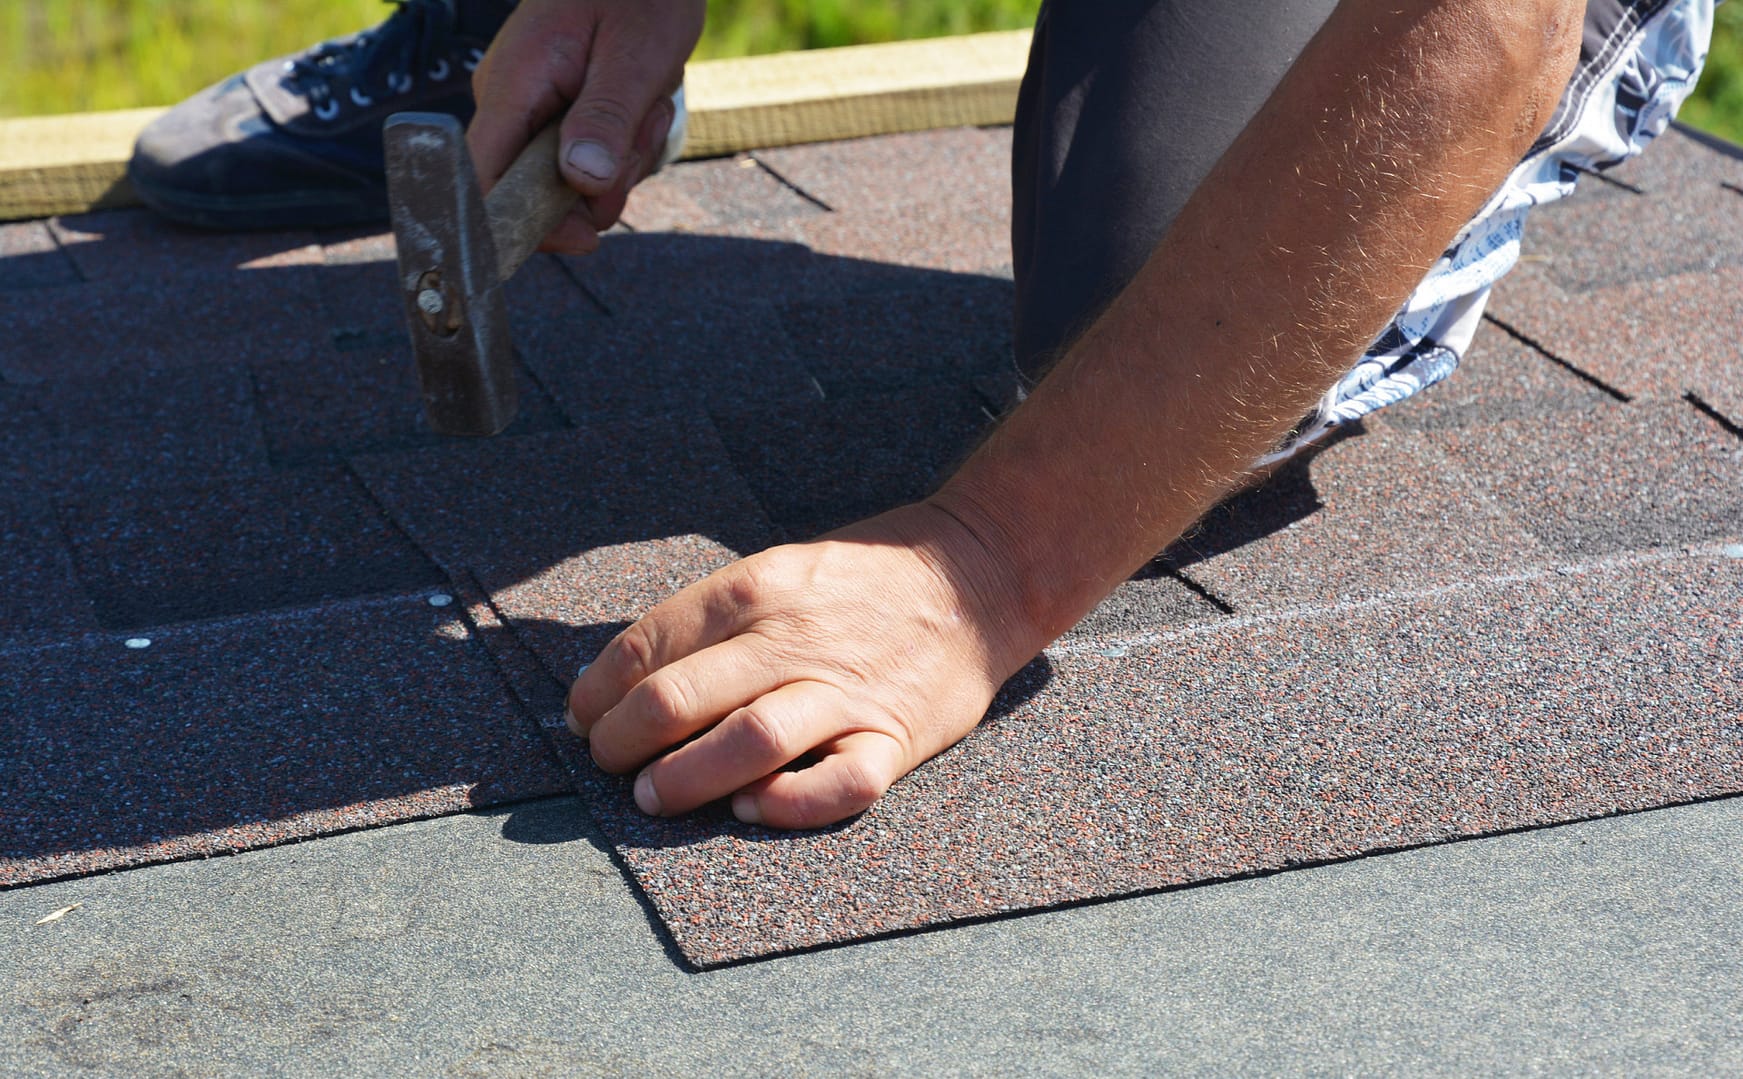 A man repairs shingles - Roofing Companies in Carroll County - Home Crafters Roofing & Contracting